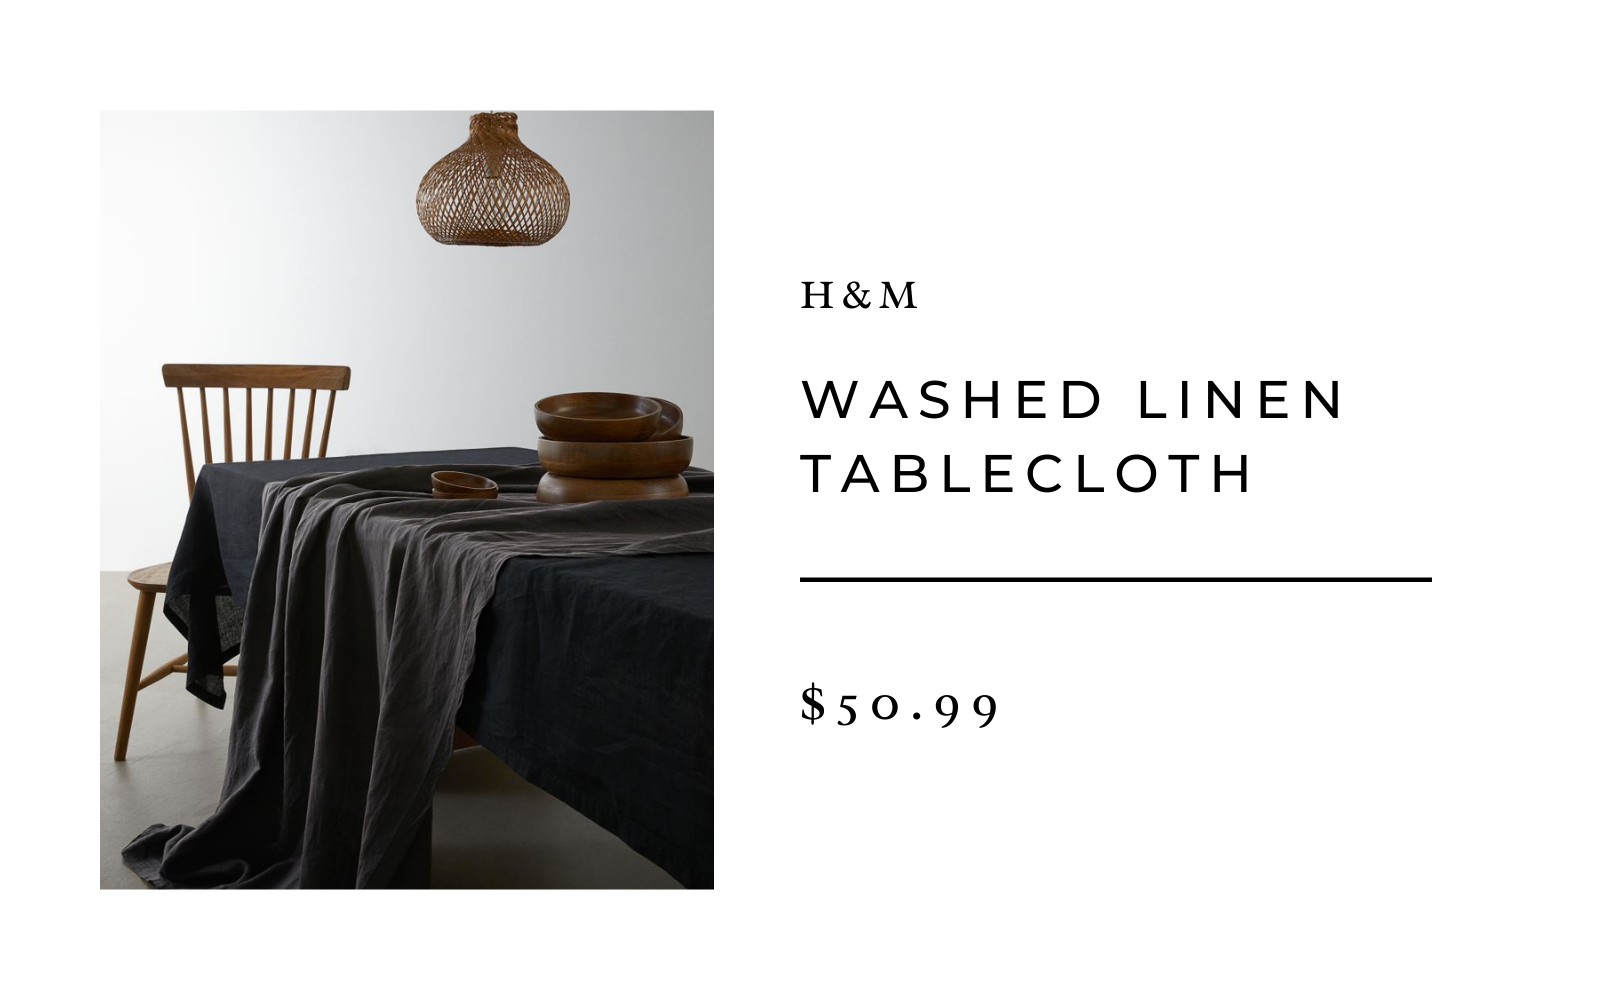 h&m washed linen tablecloth